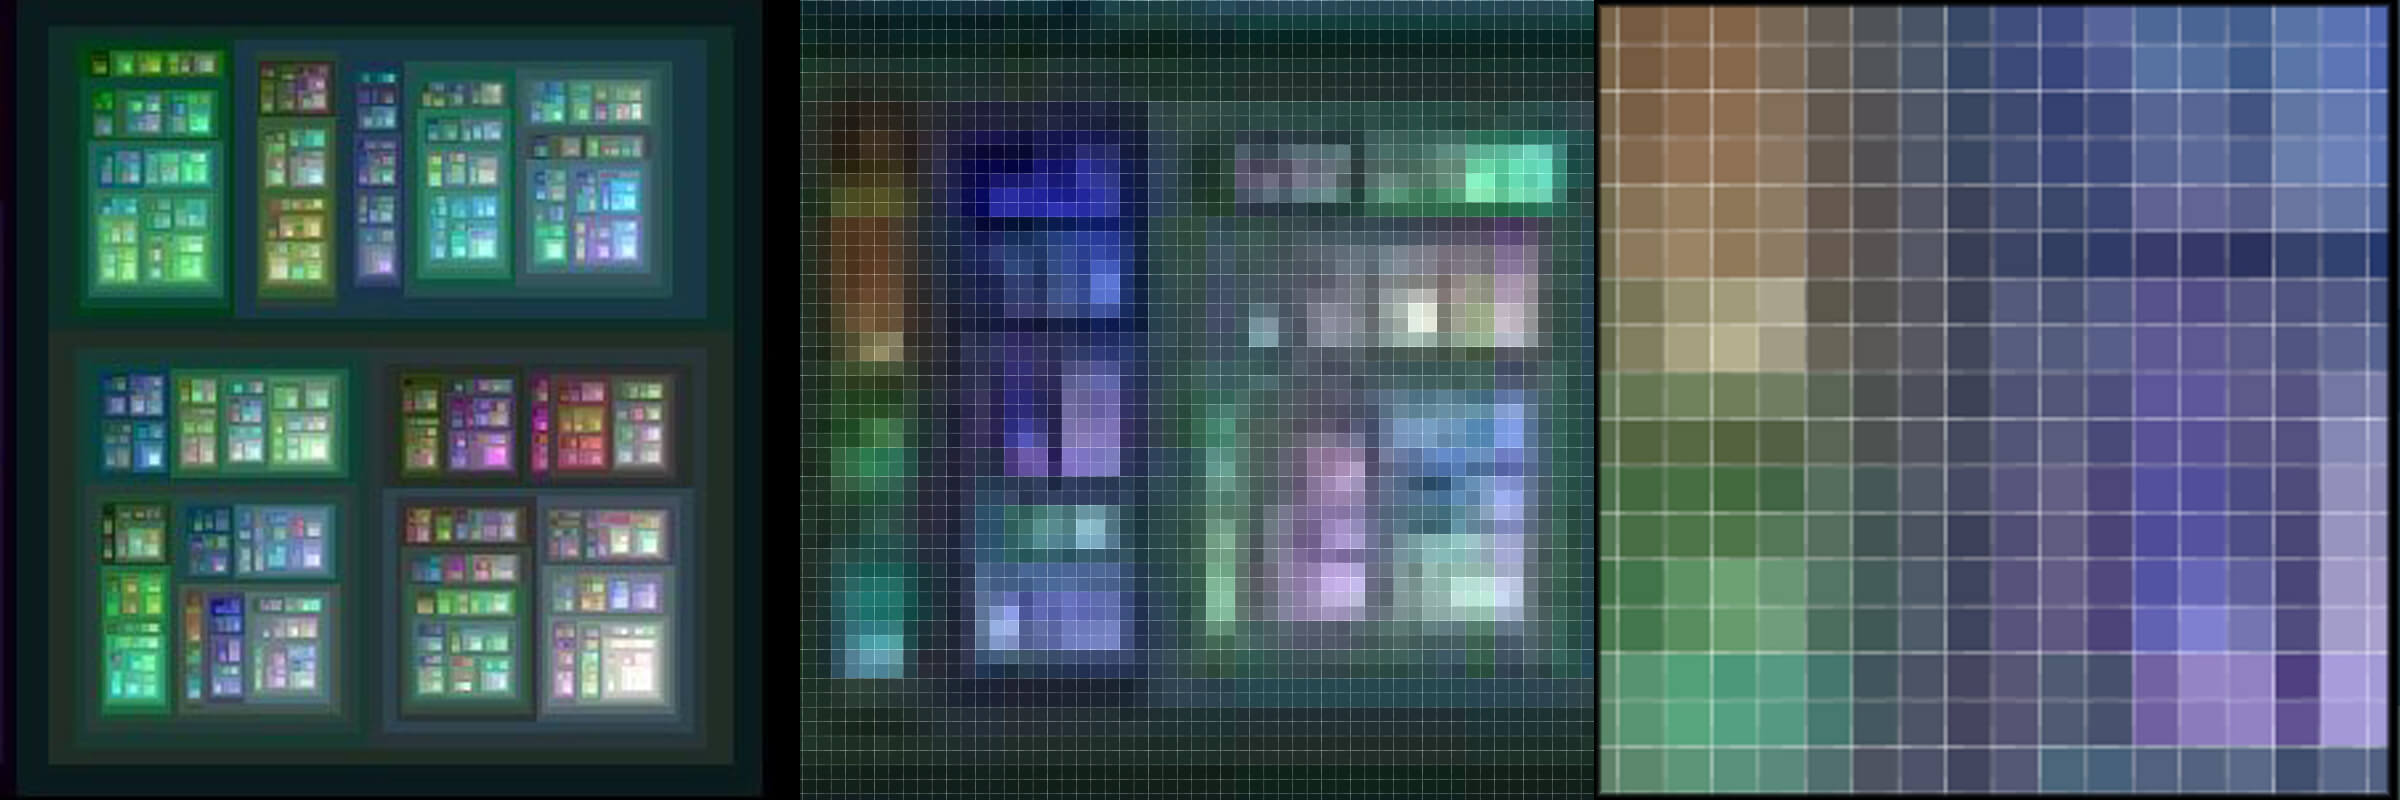 A pattern of glowing squares generated with a visual programming language called Processing.